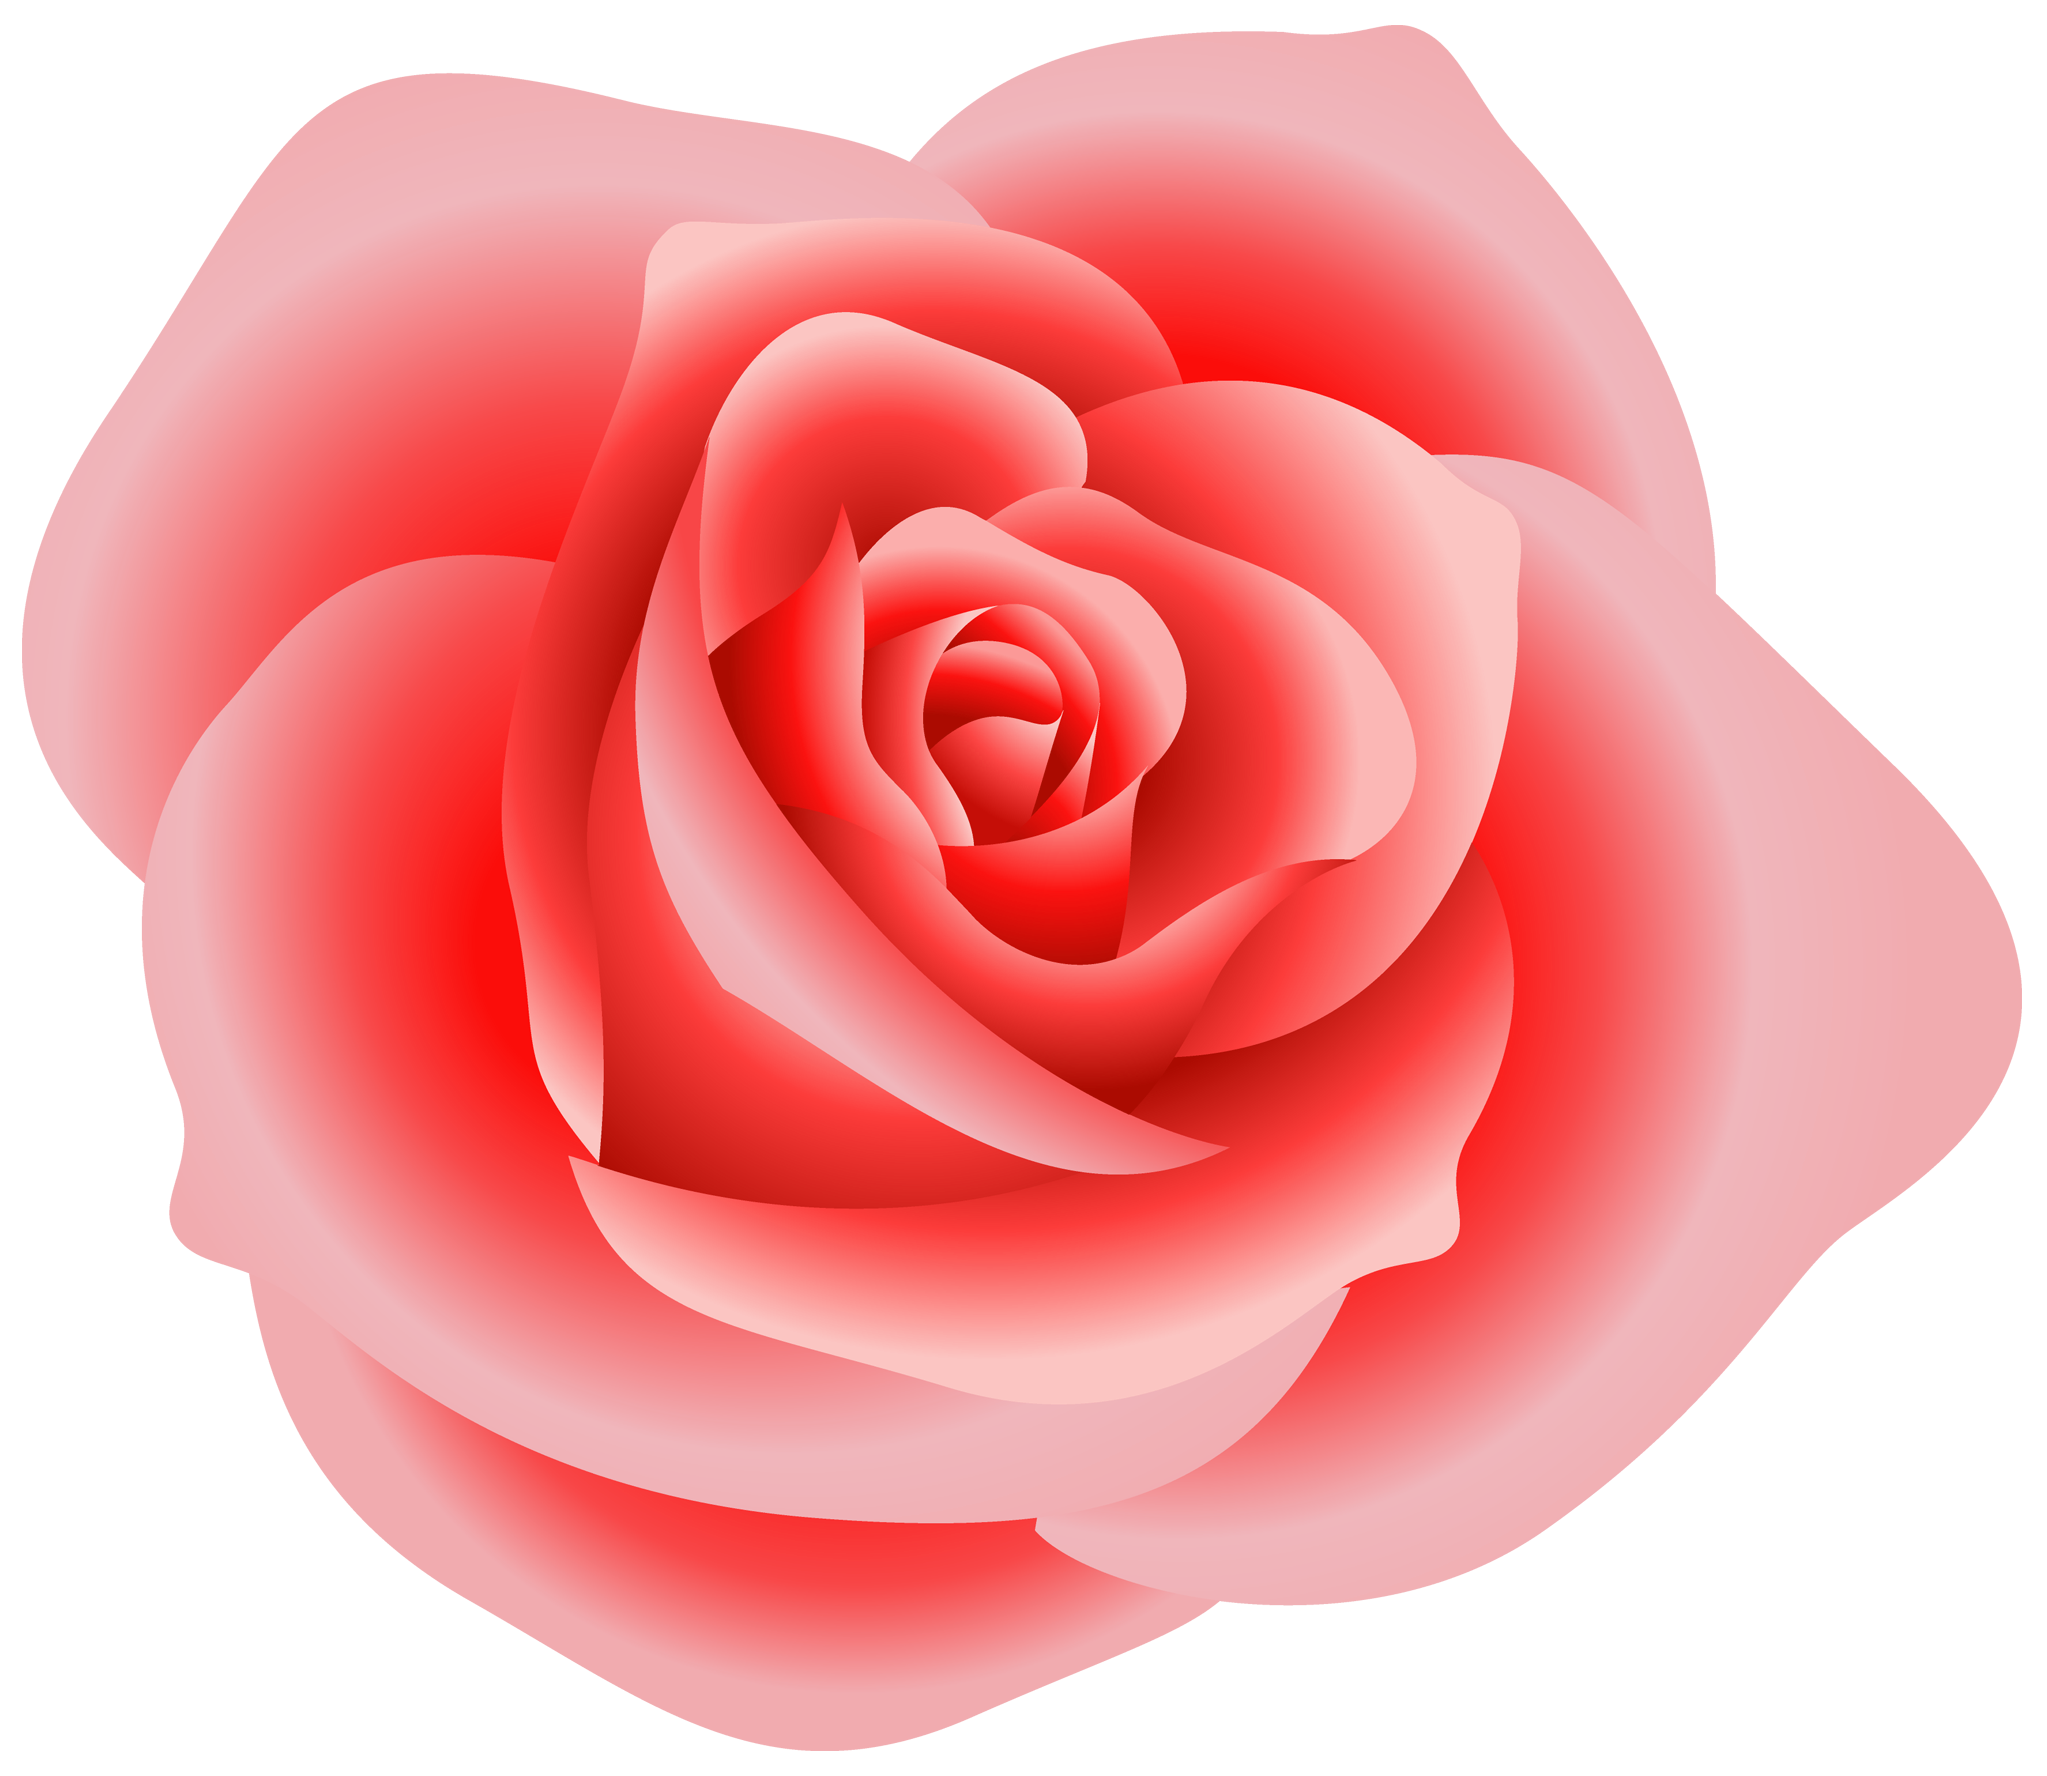 Free Rose Images, Download Free Clip Art, Free Clip Art on